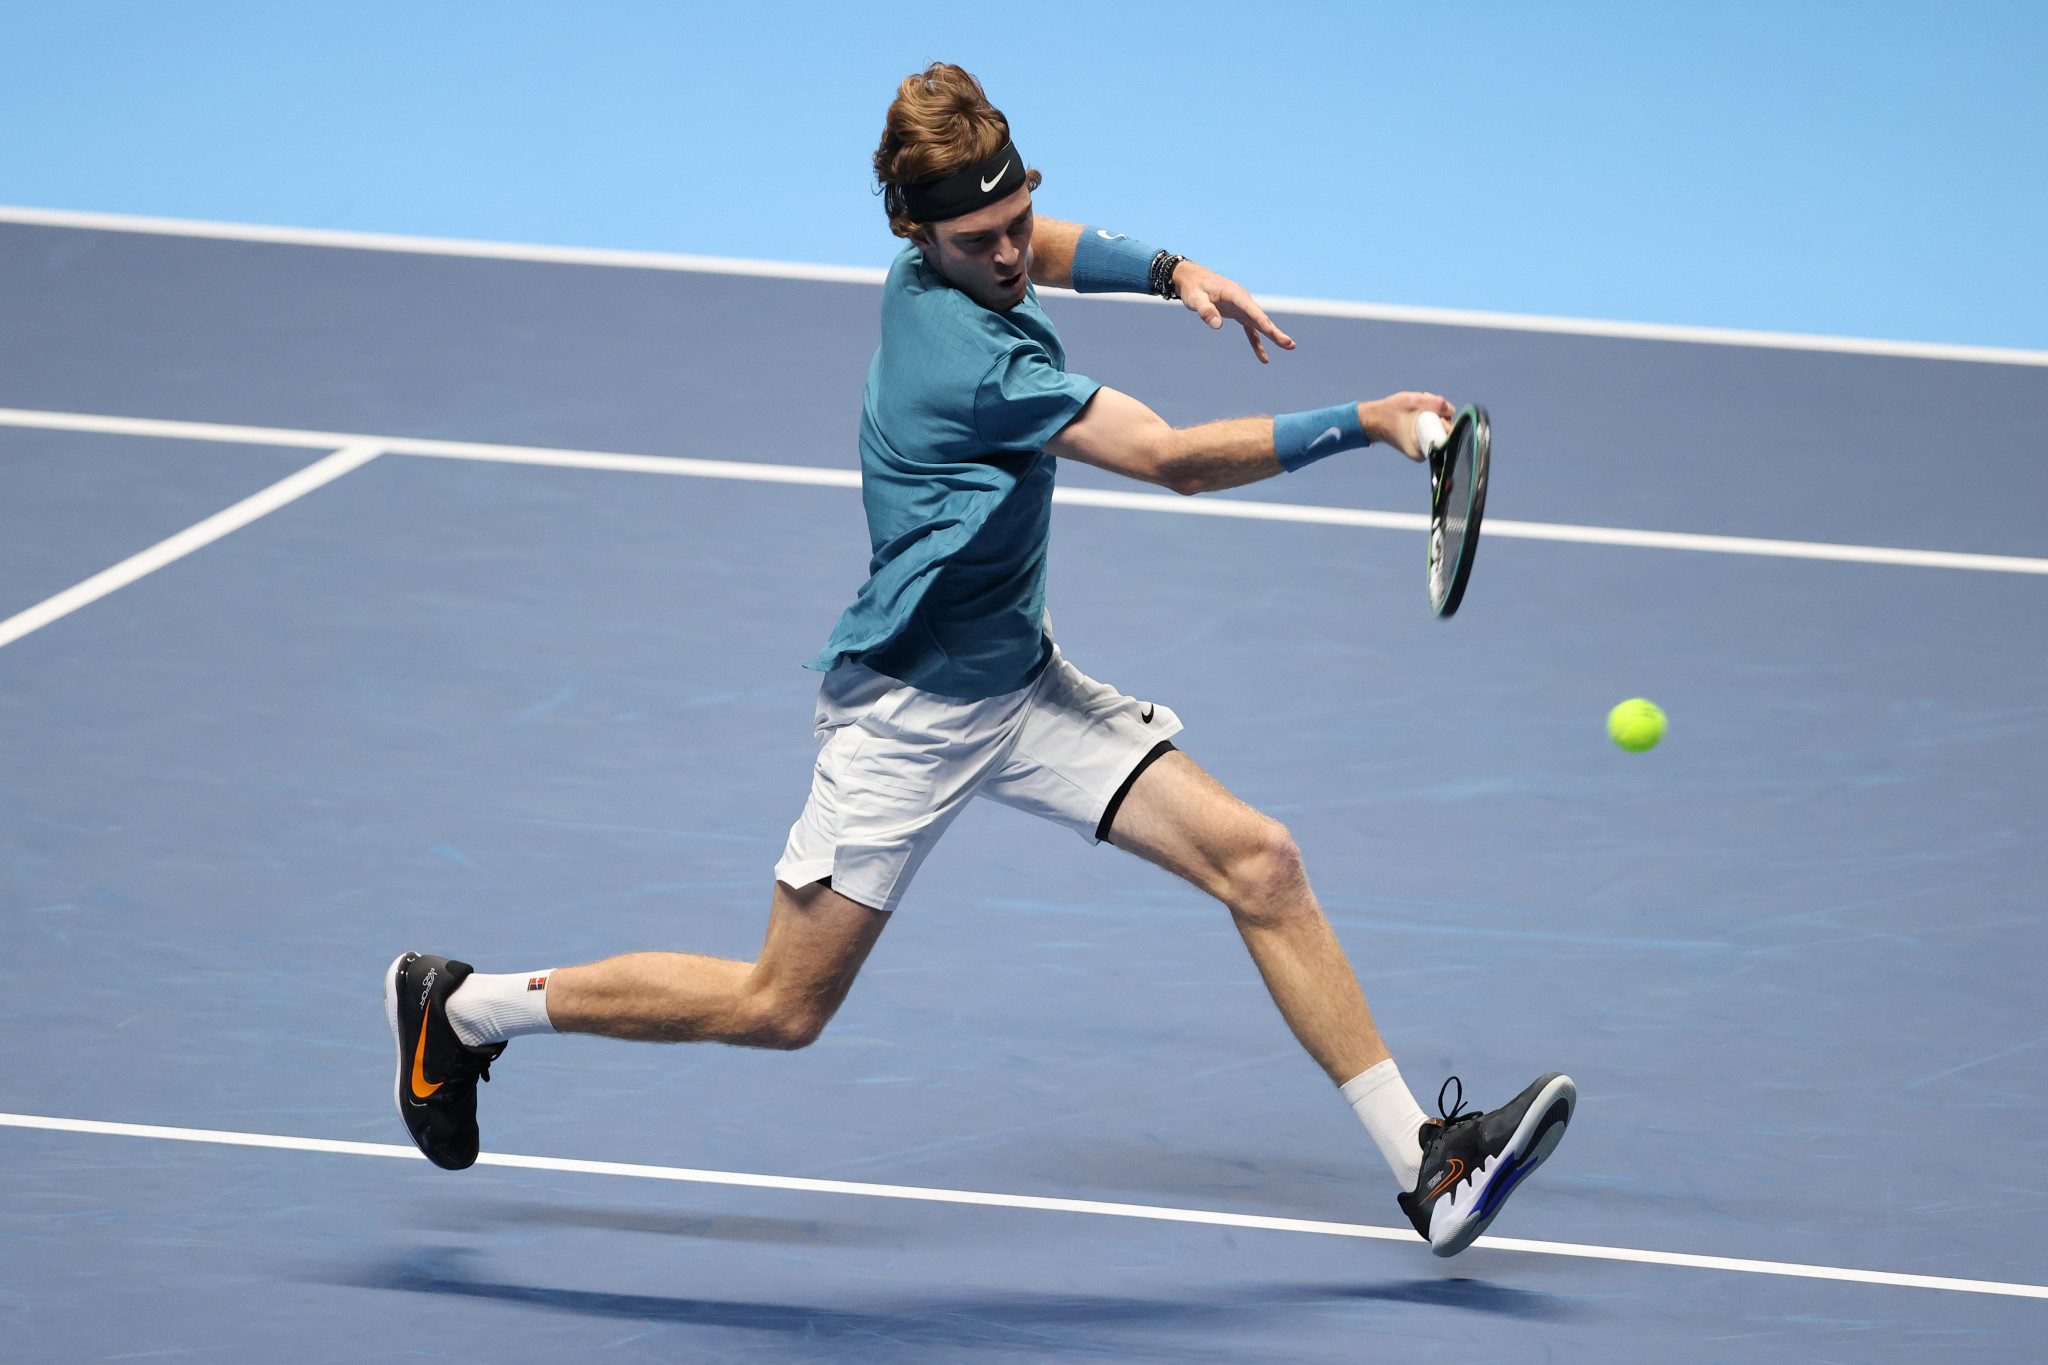 Andrey Rublev beat Stefanos Tsitsipas 6-4, 6-4 to secure an opening victory at the ATP Finals ©Getty Images